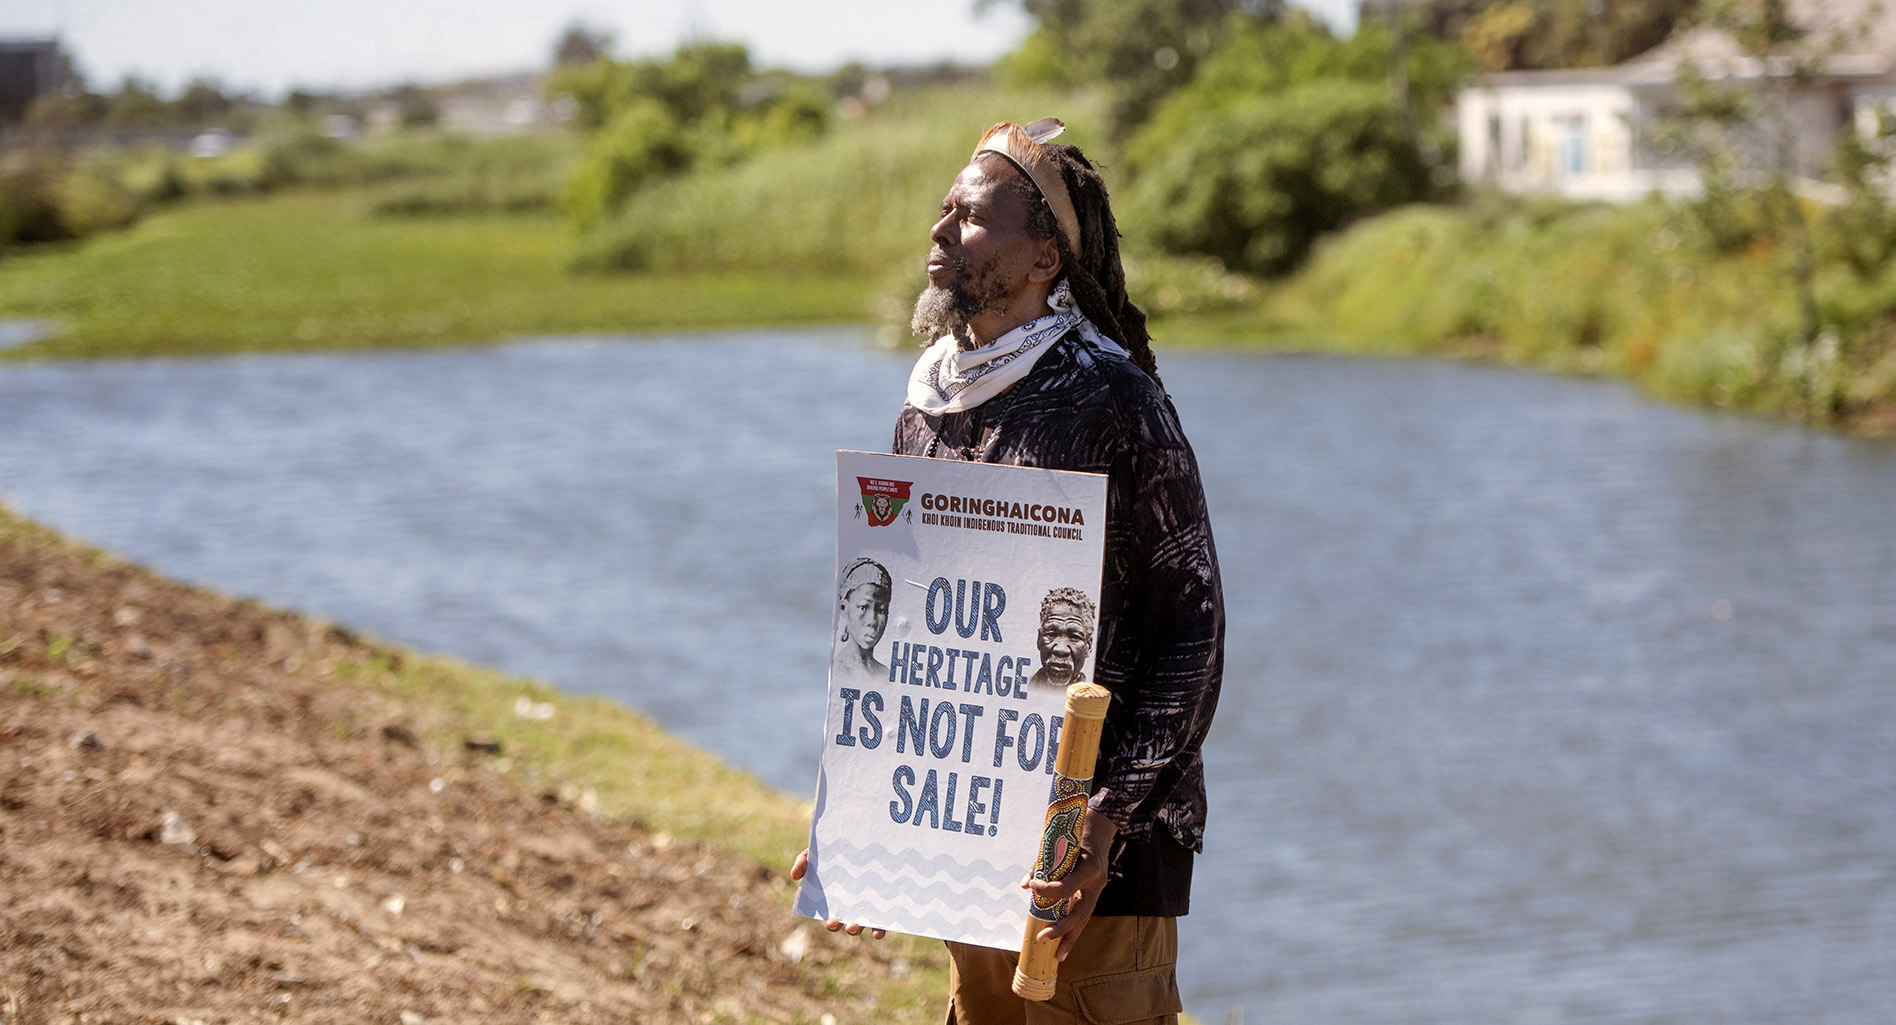 An image of a protestor during the Liesbeek Action Campaign against the River Club Development